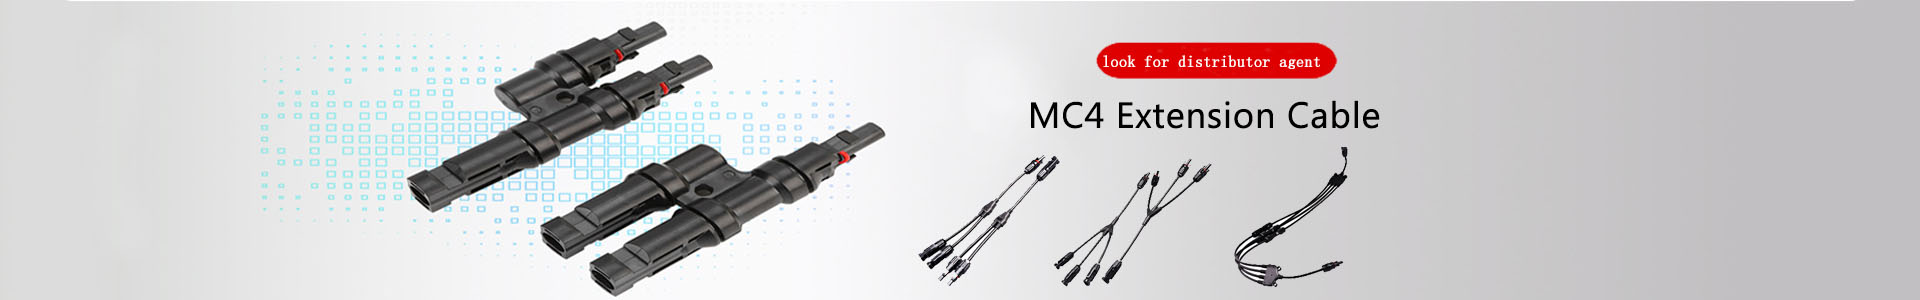 H1Z2Z2 solar cable | Handwe Group-Solar | solar connector,solar branch connector,diode fuse connector,MC4 extnsion cable,H1Z2Z2 solar cable, UL4703 solar cable | Leading manufacturer and supplier of solar pv cables and connectors